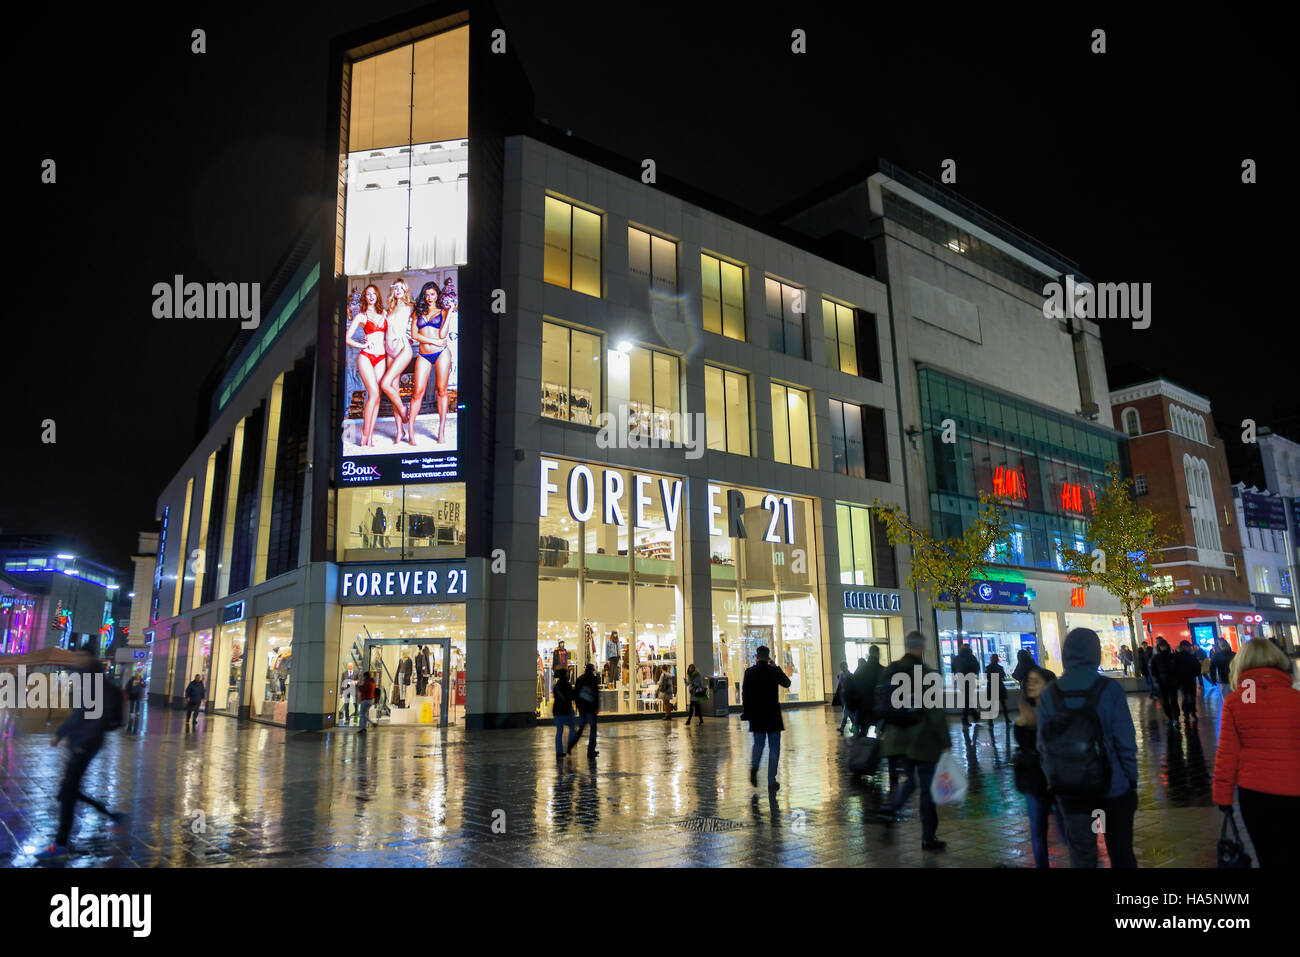 Forever 21 store in Liverpool Stock Photo - Alamy